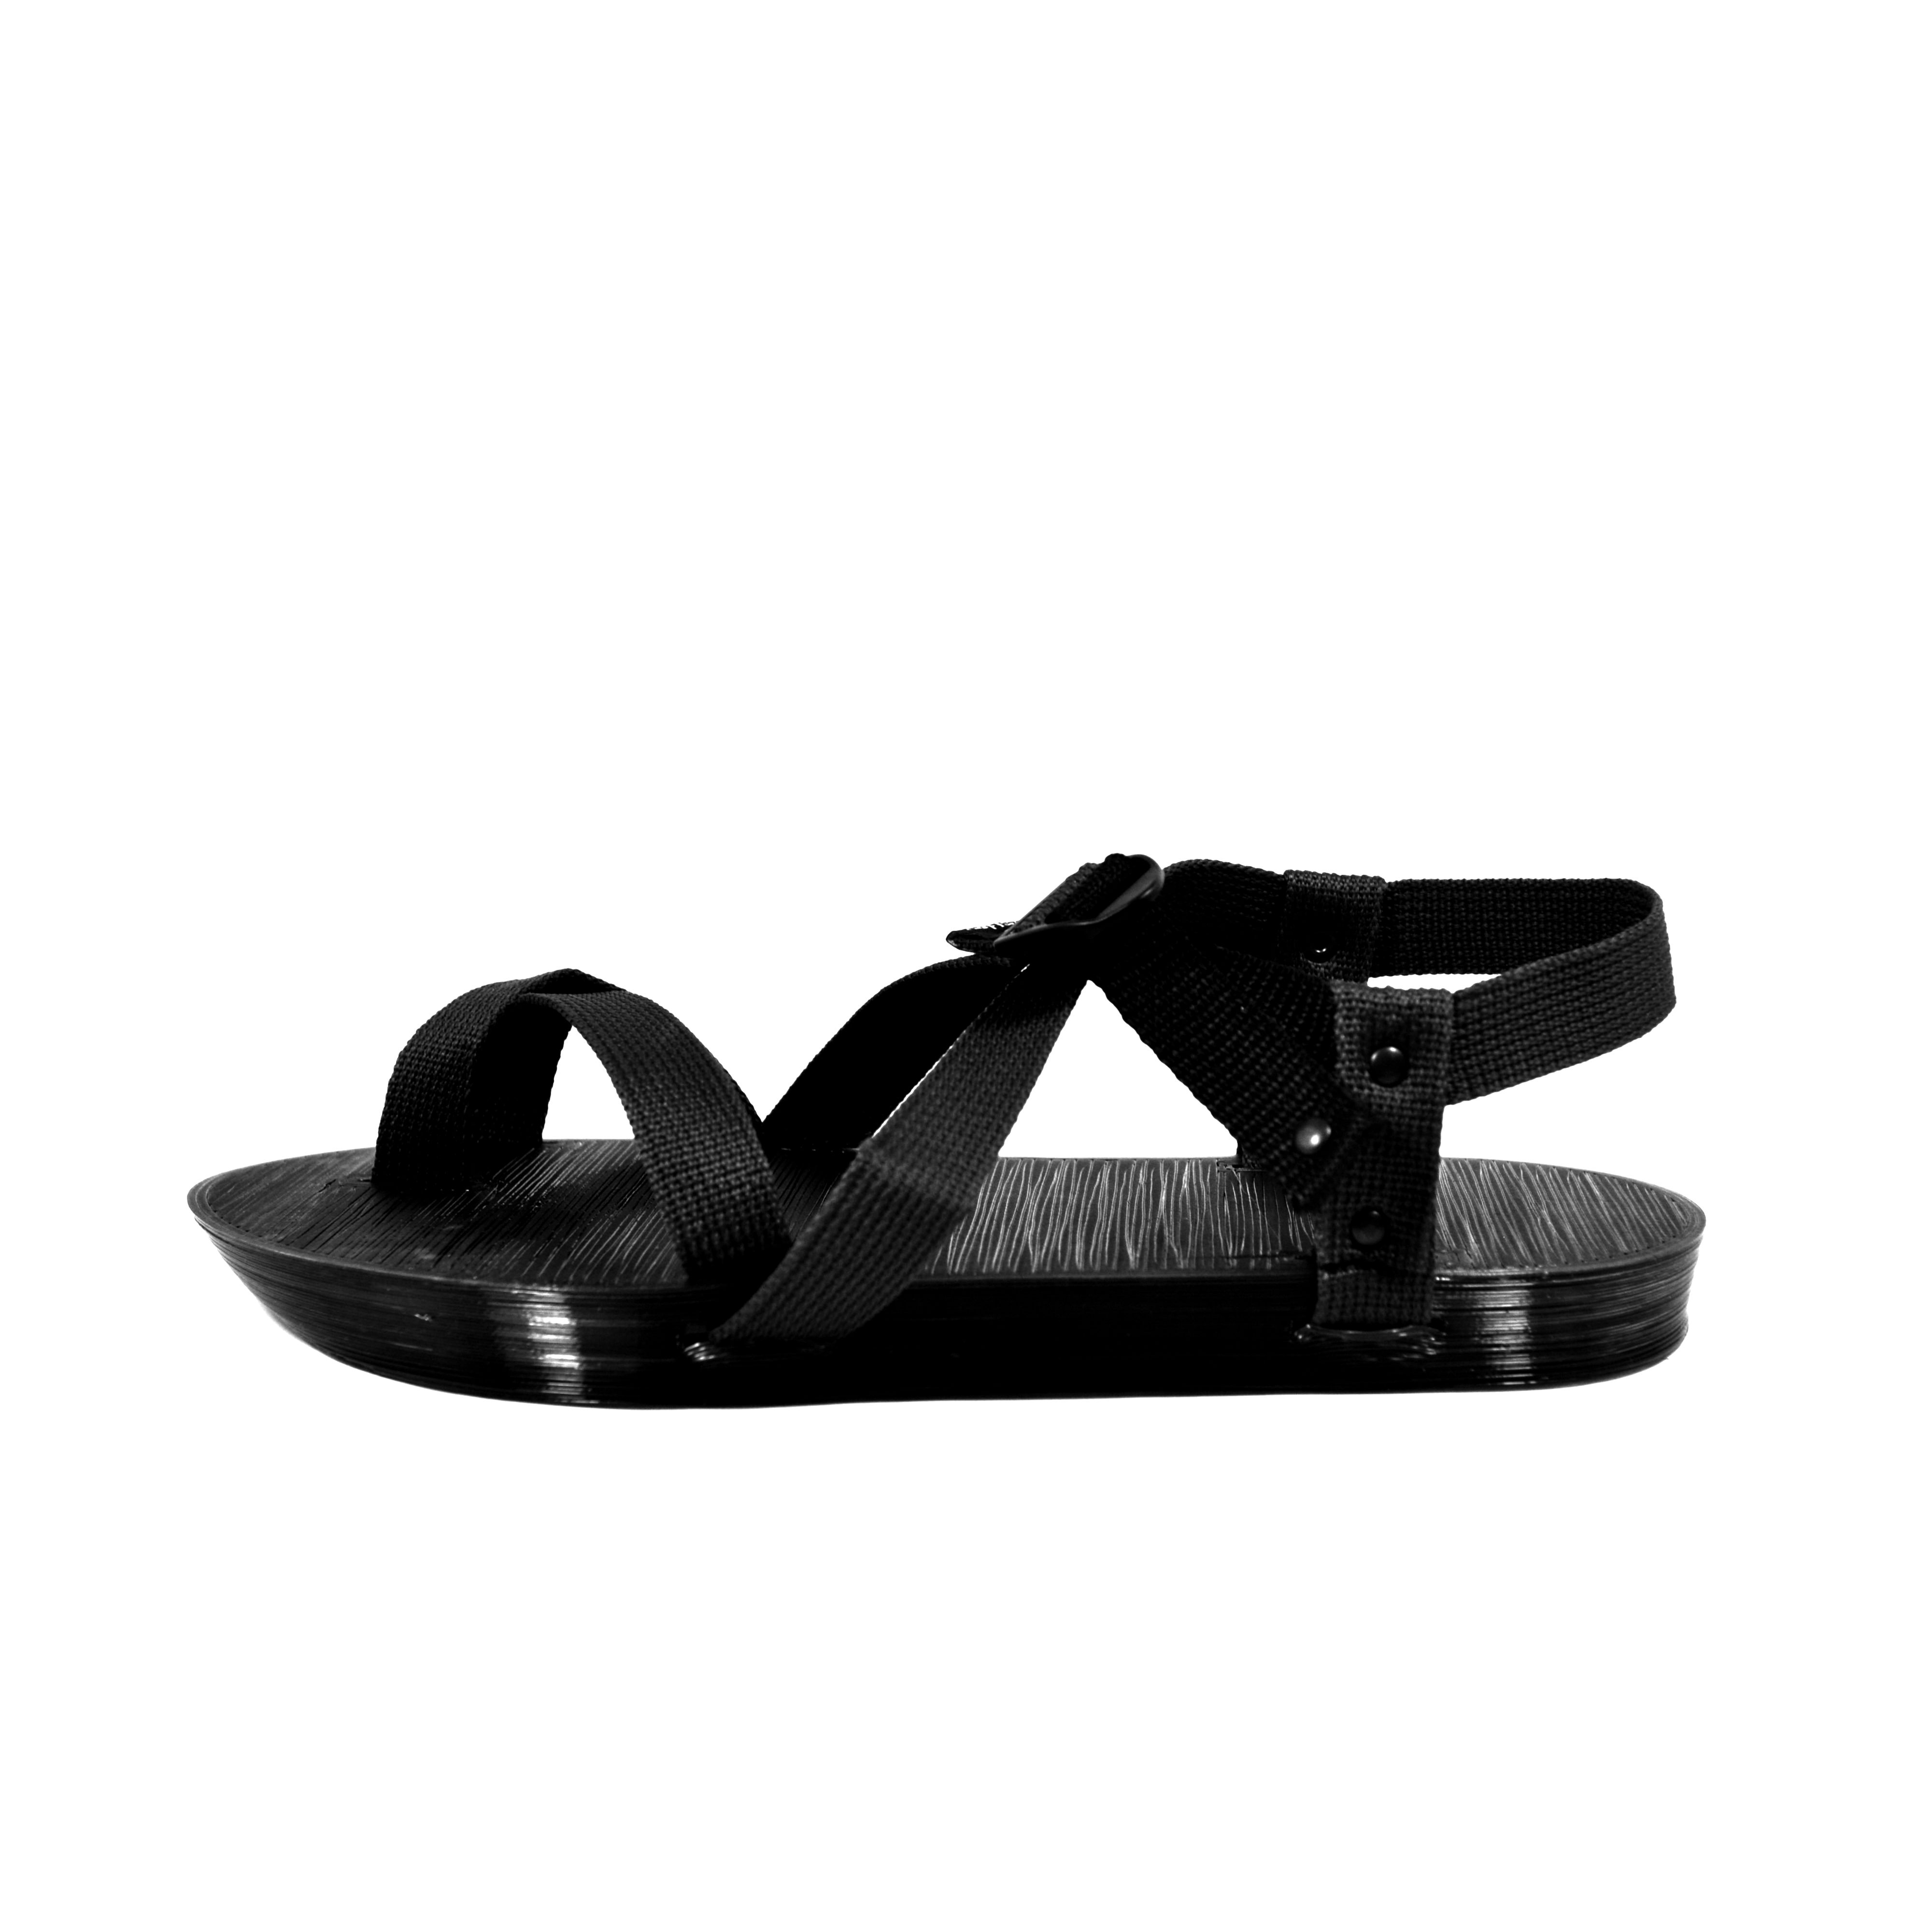 Apollo | Men's | OESH Shoes 3D Printed Sandals | Healthy by Design